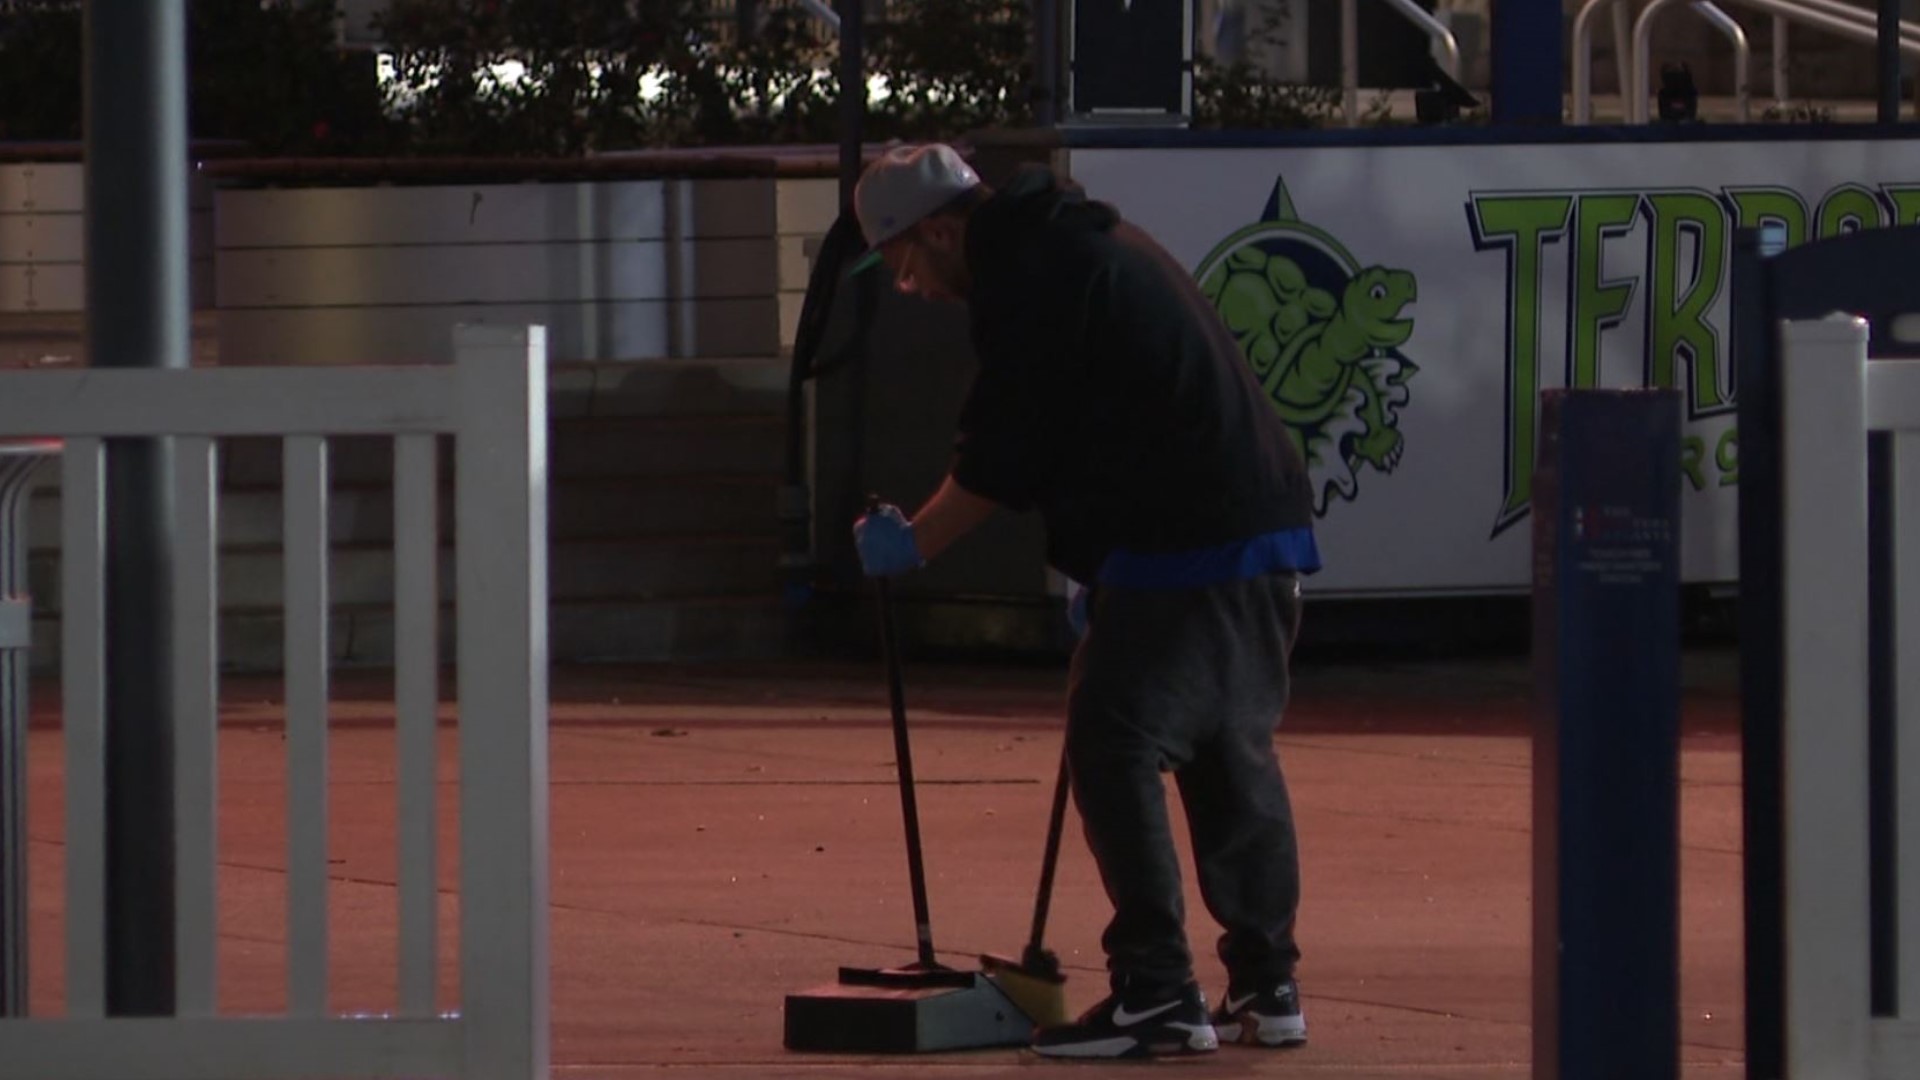 11Alive's Christie Diez spoke to the fan, who said he just "felt some kind of way" after seeing the trash left behind following Game 5 of the World Series.